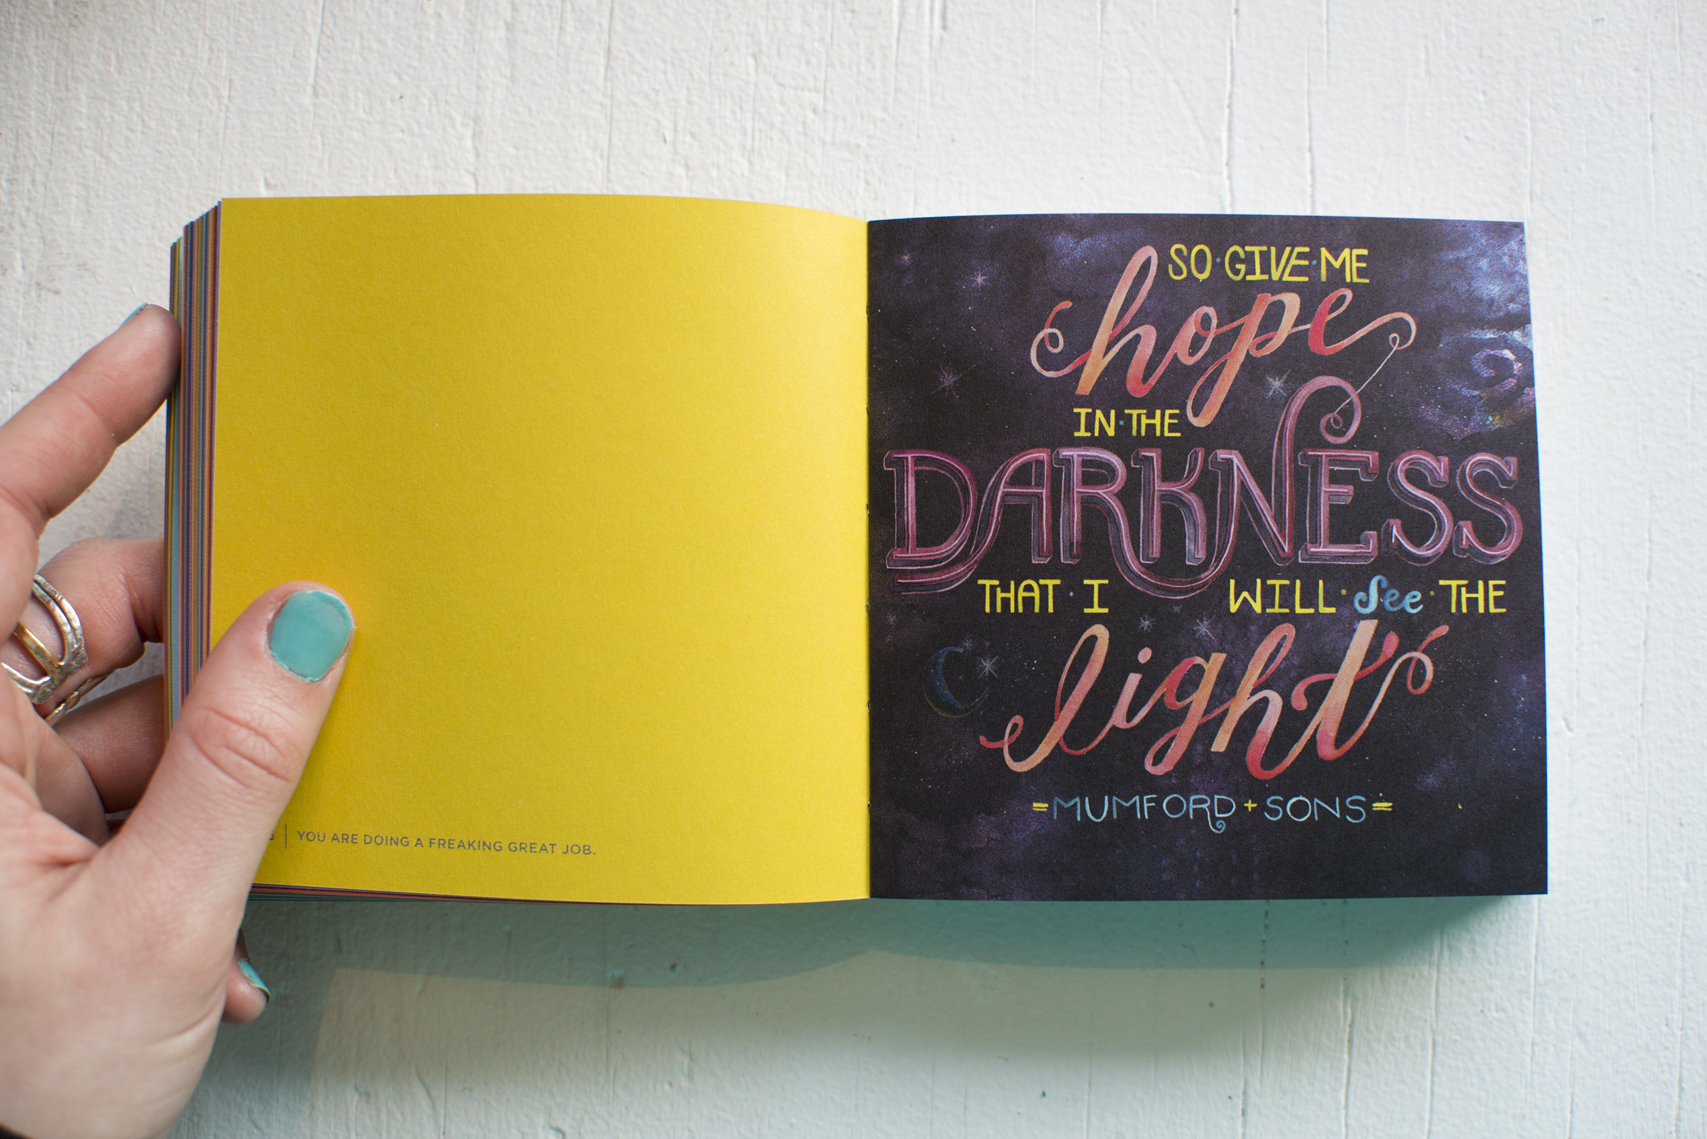 Photo + Illustration by Becca Cahan // Workman Publishing "You are Doing a Freaking Great Job" book